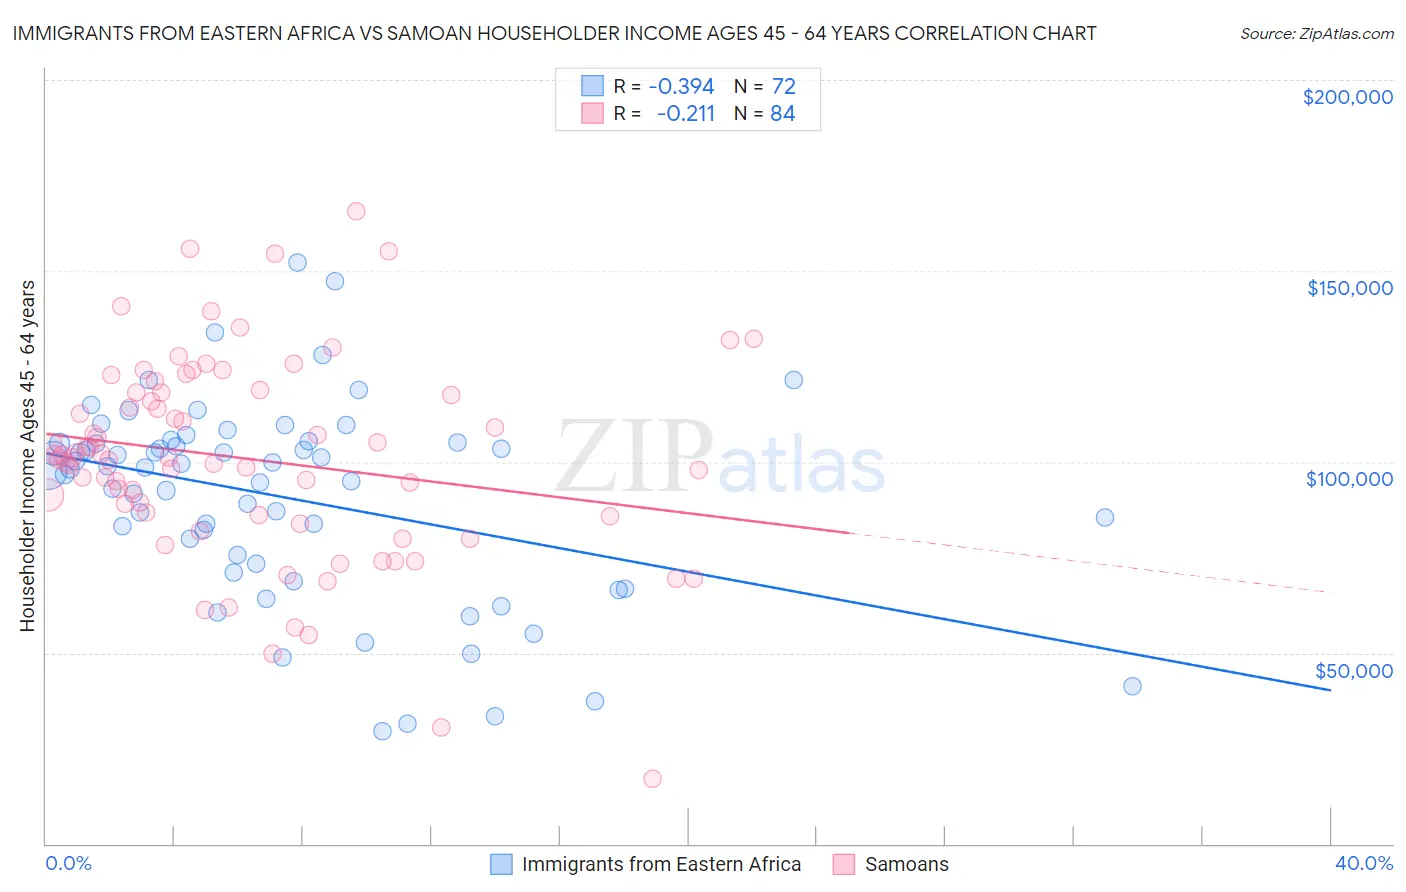 Immigrants from Eastern Africa vs Samoan Householder Income Ages 45 - 64 years